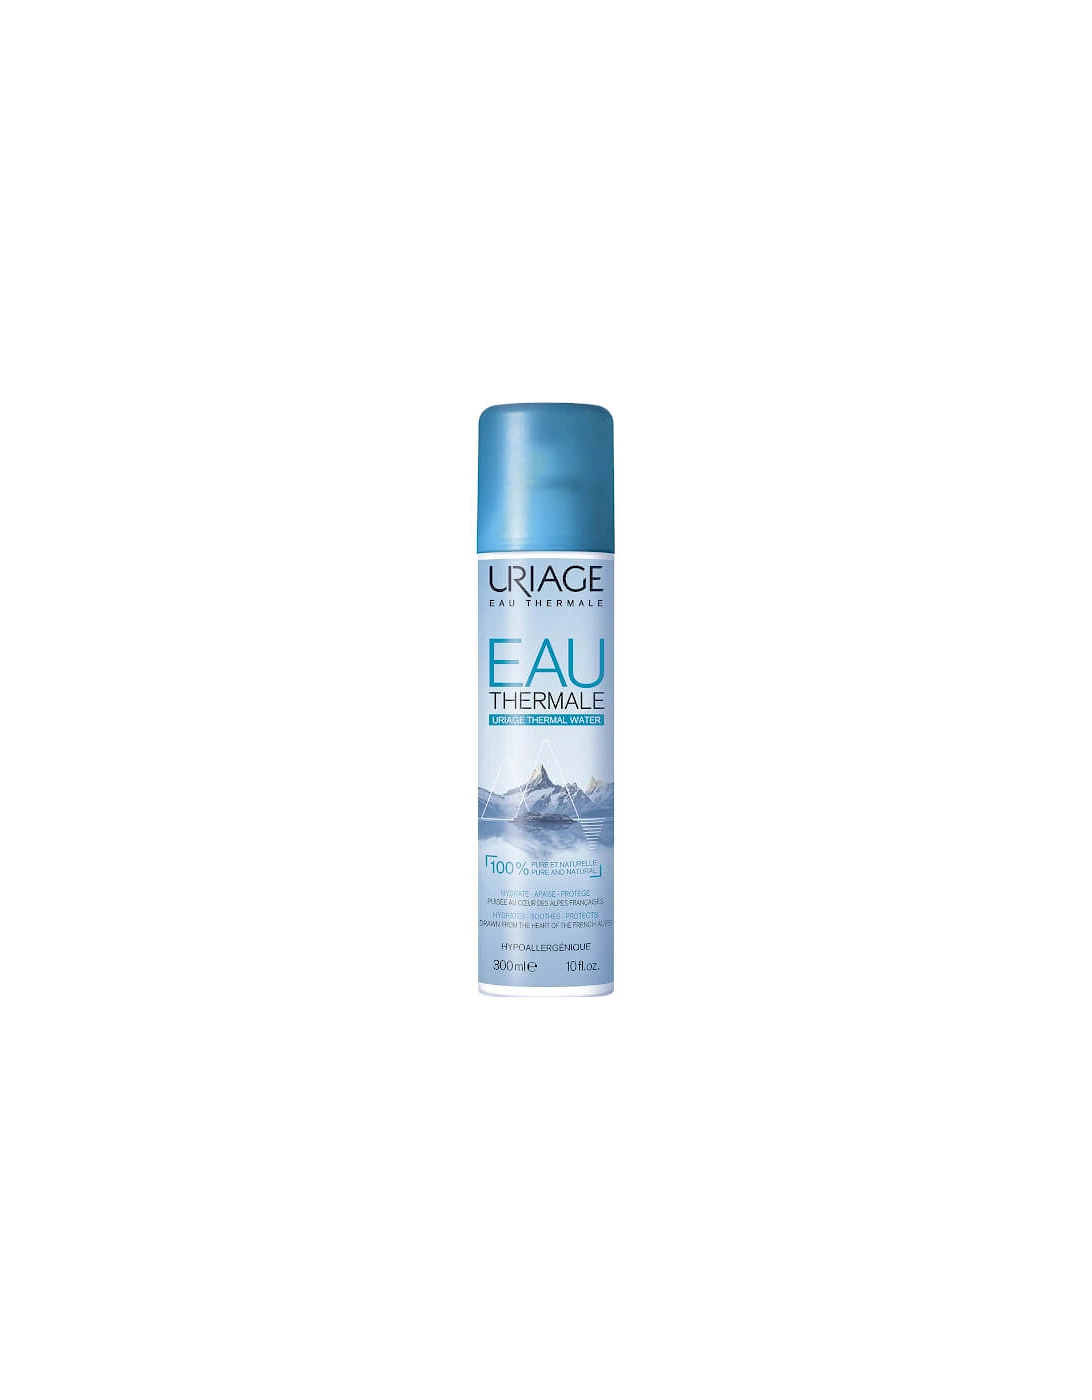 Thermal Water Spray 10 fl.oz. - - Eau Thermale Pure Thermal Water (300ml) - Paboo, 2 of 1